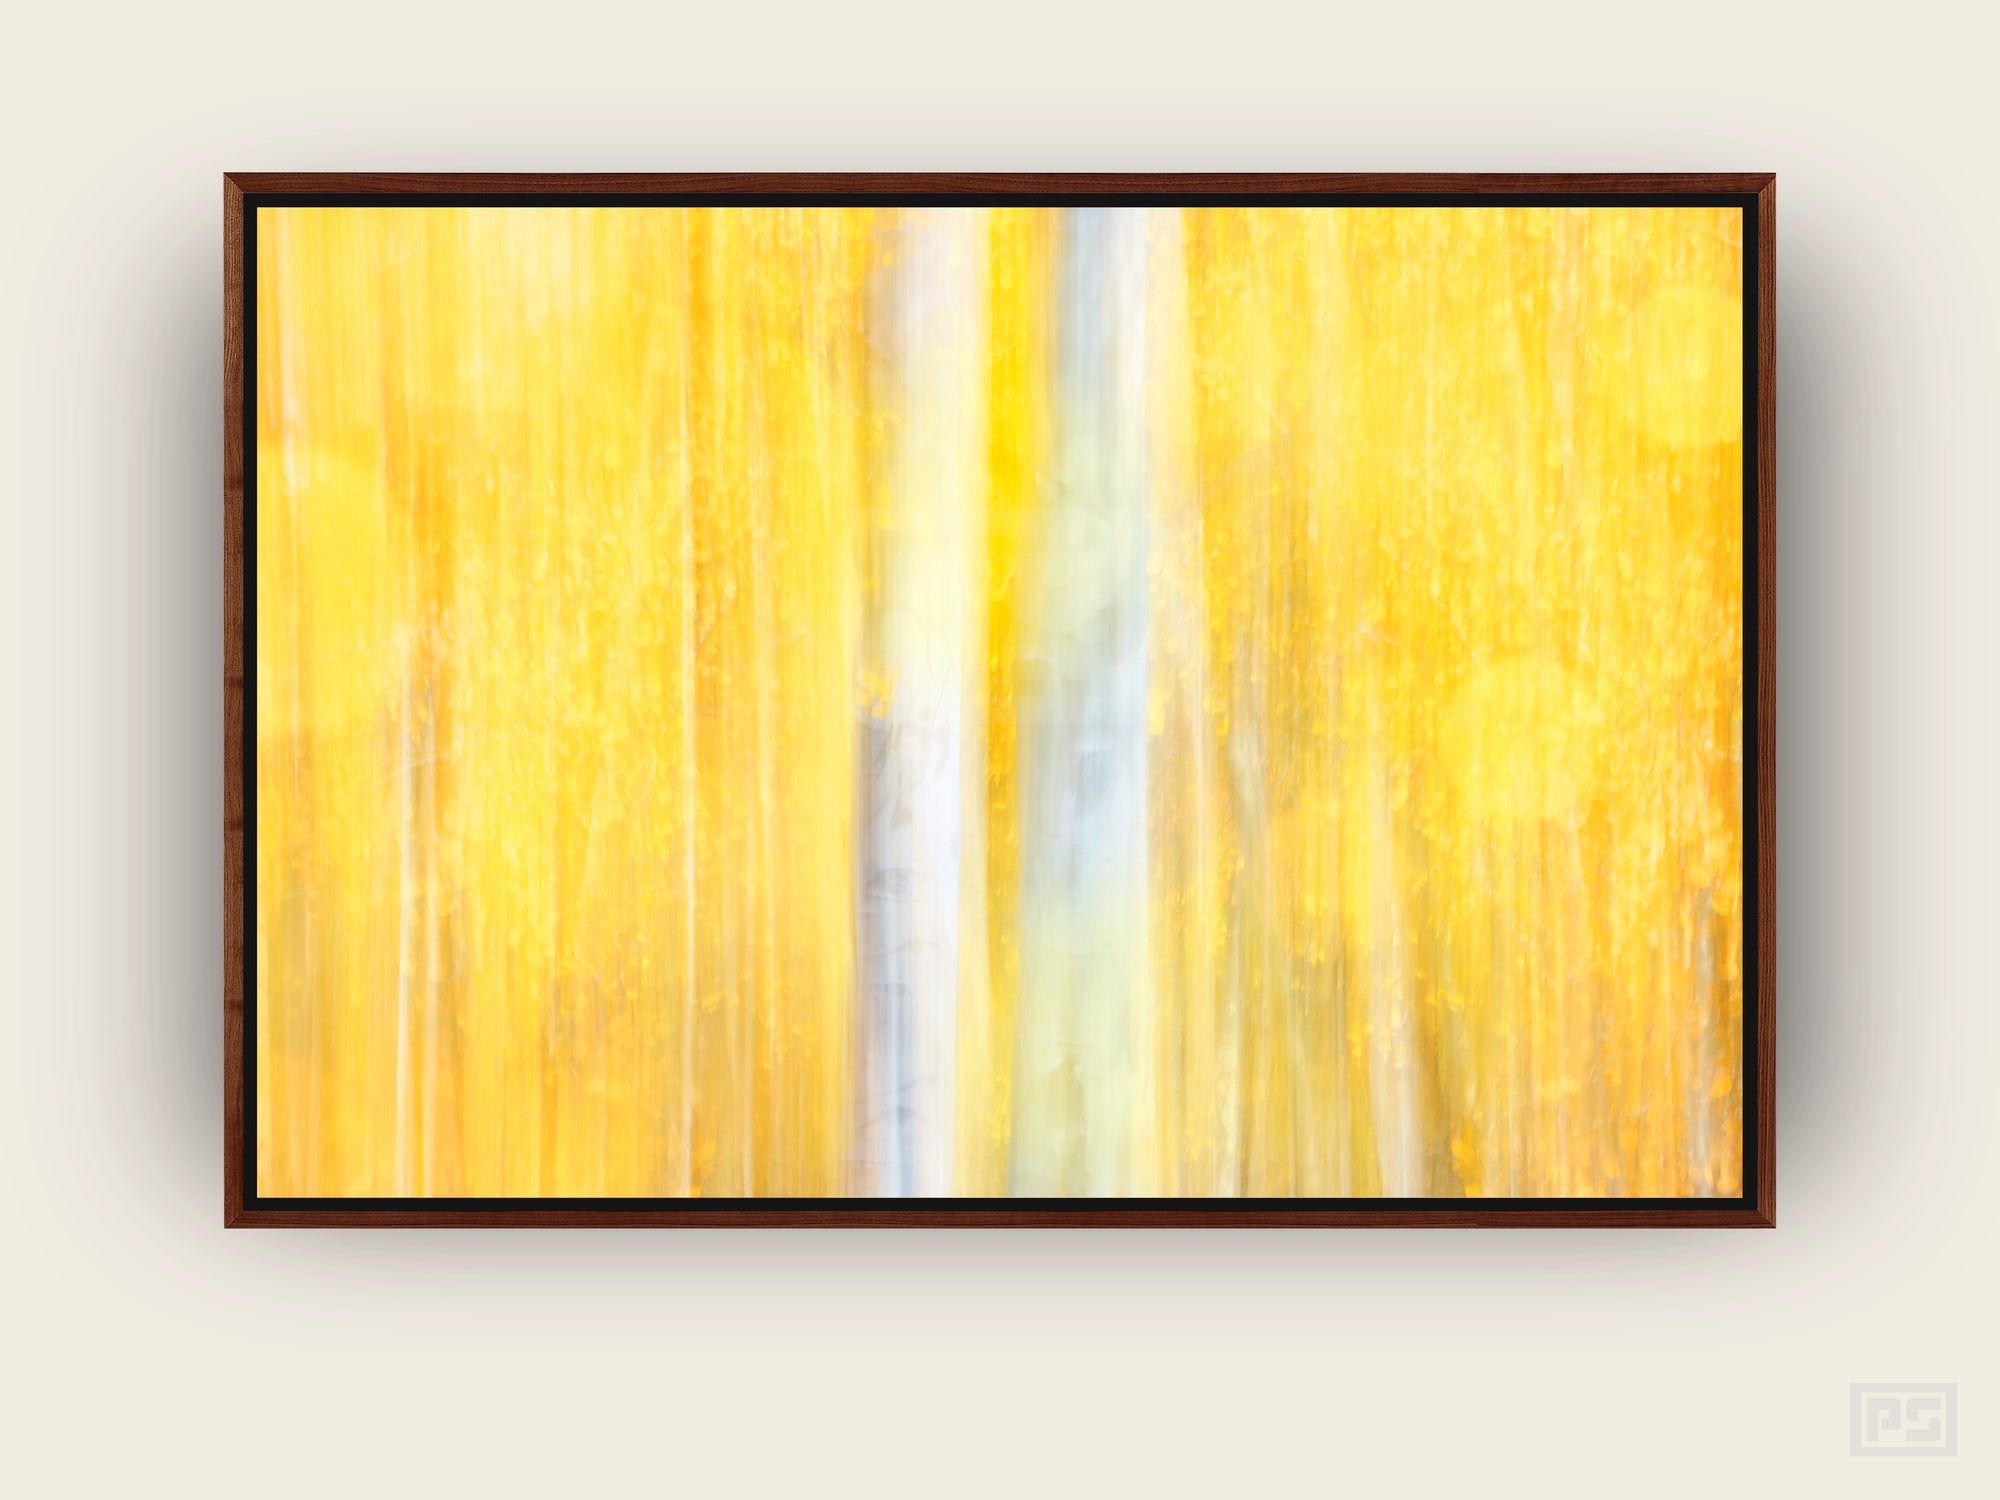 Framed Canvas Print "The Aspens in Fall"